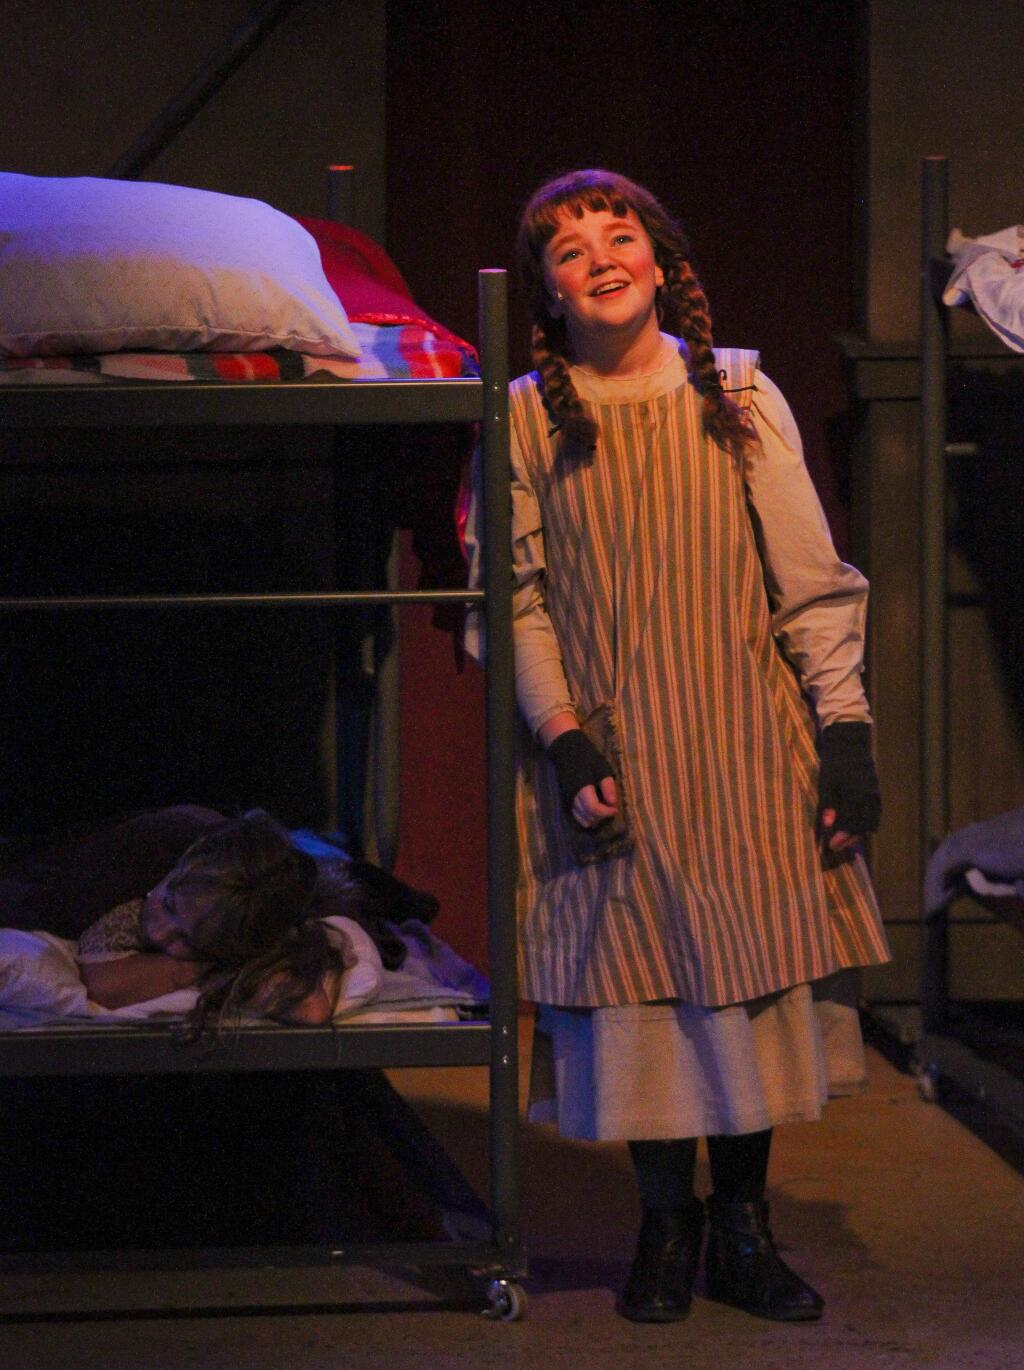 Alina Kingwill Peterson stars as the title character in the musical “Annie,” onstage through Dec. 22 at Santa Rosa's 6th Street Playhouse.